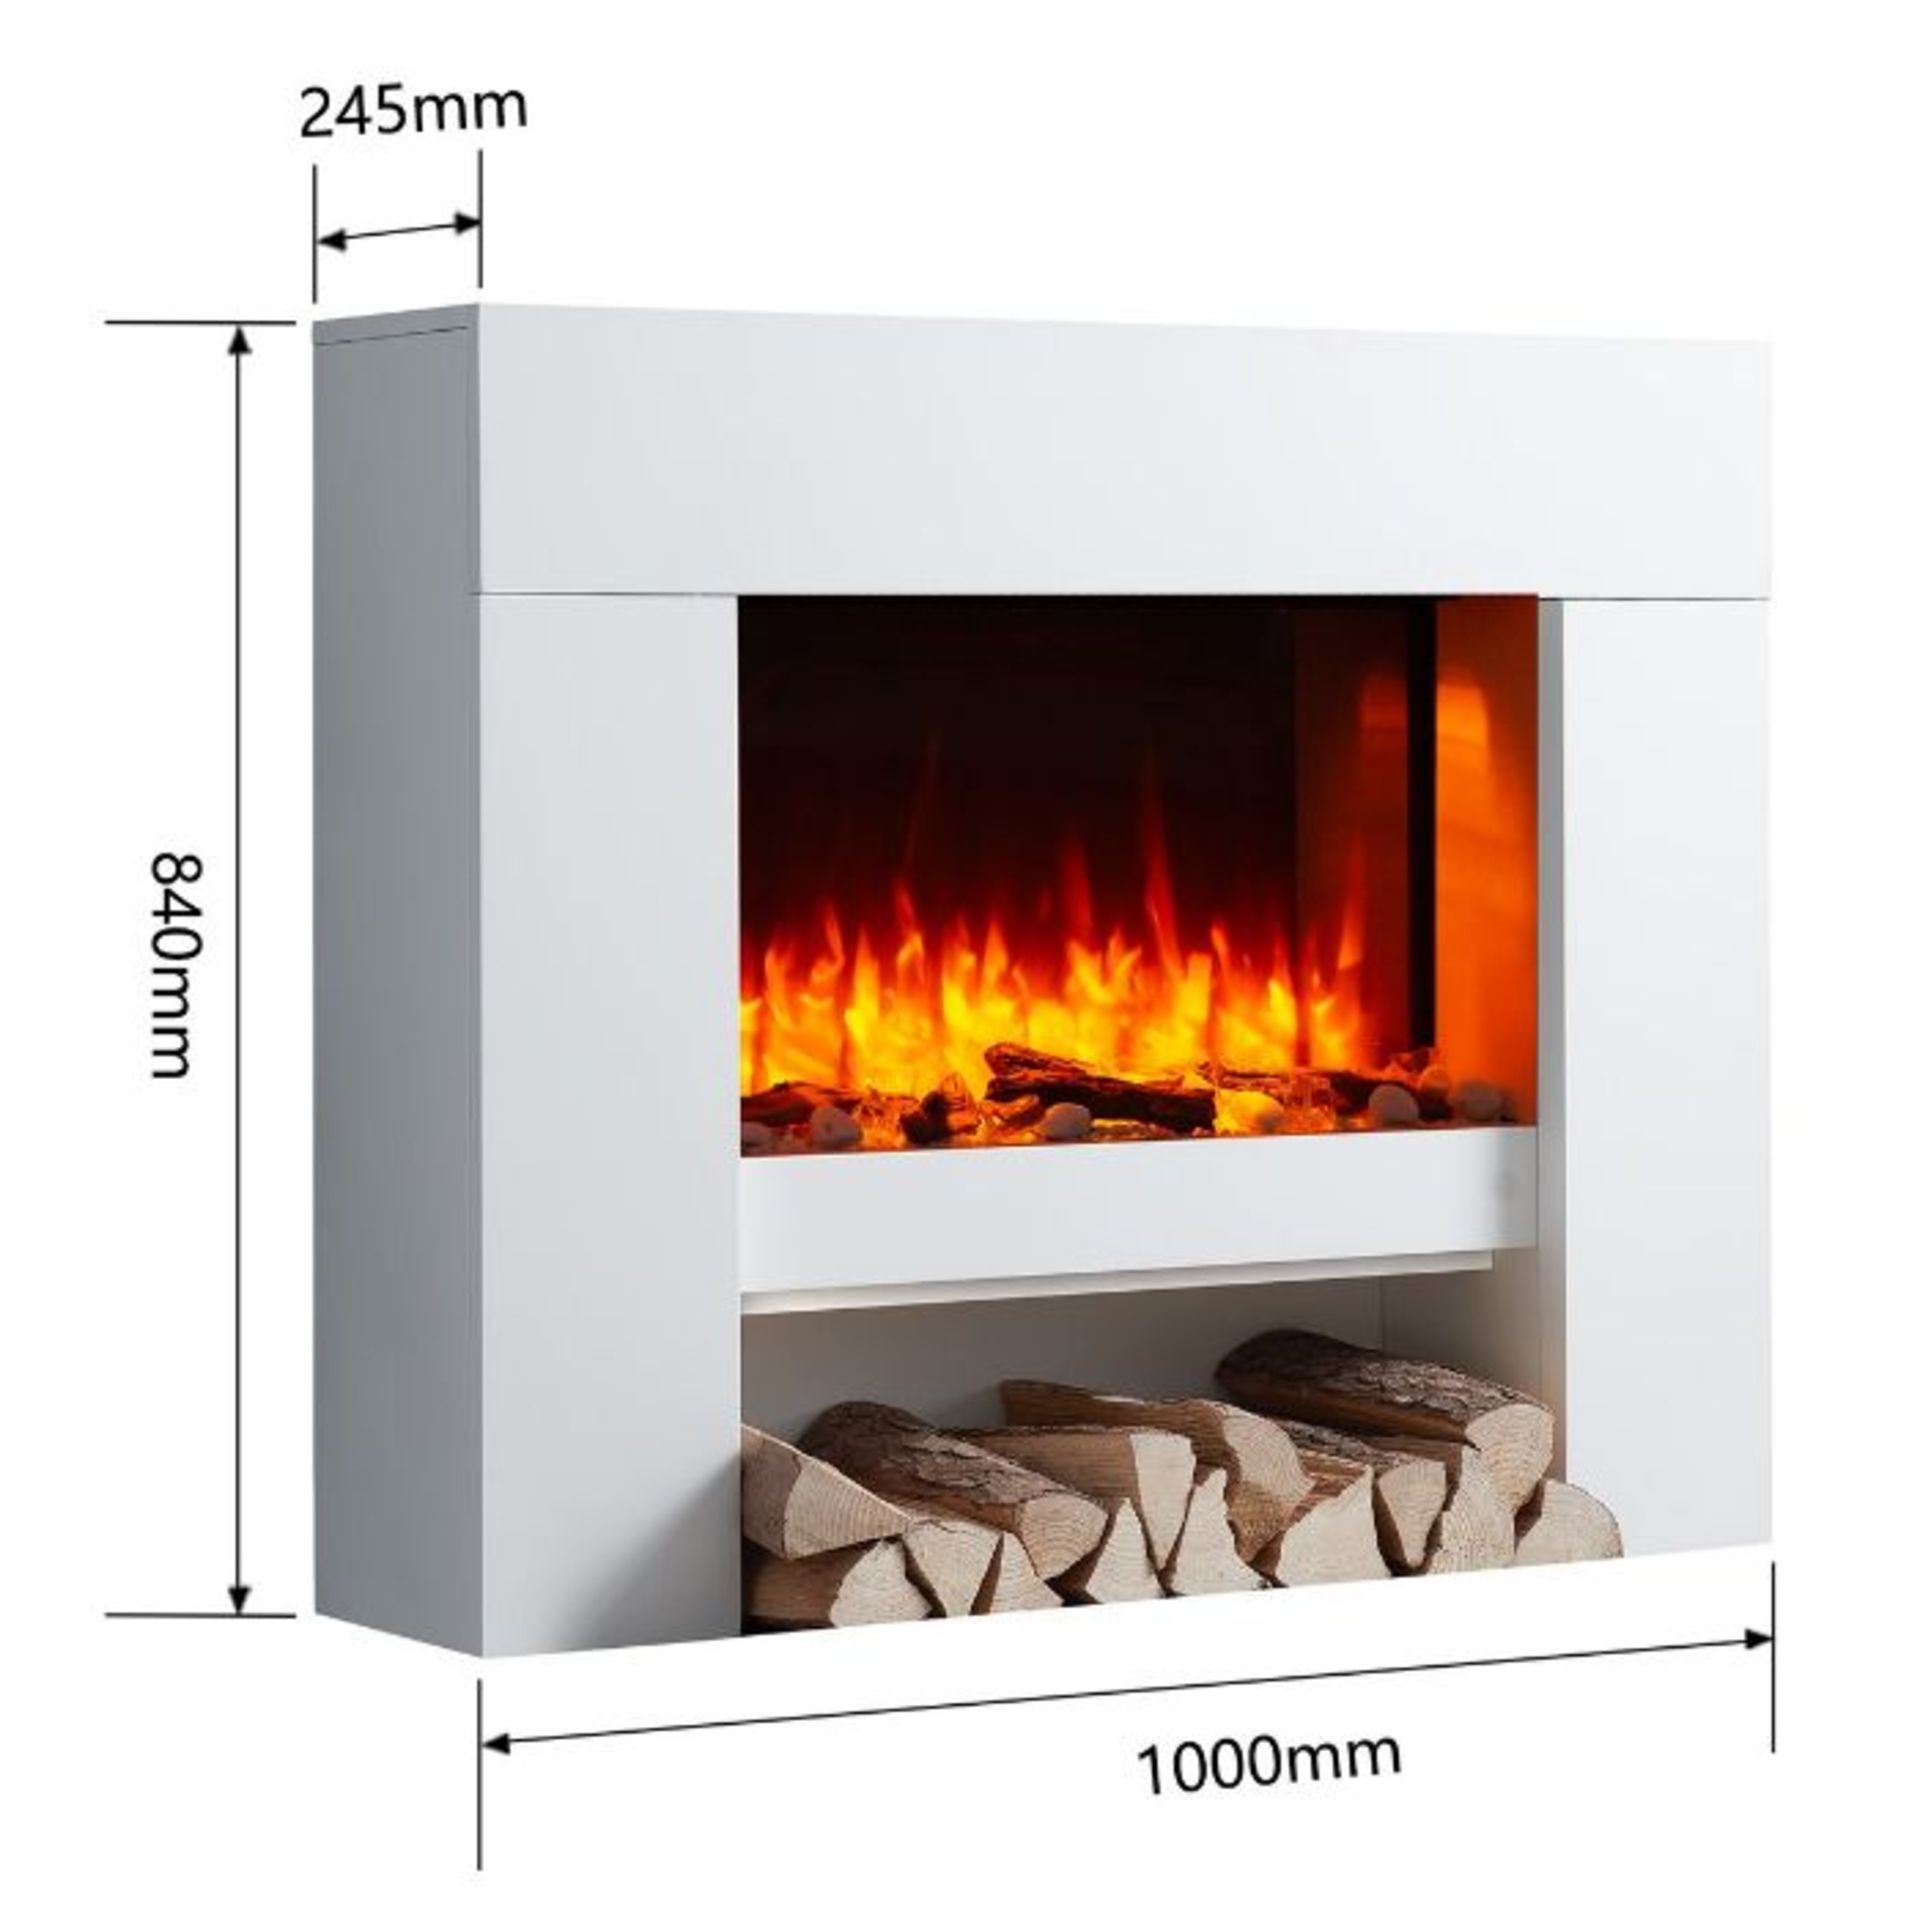 Belfry Heating,Tyson Wall Mounted Electric Fire Suite(U000282627) RRP -£386.99 (25219/1 -EDSD1007)( - Image 2 of 2